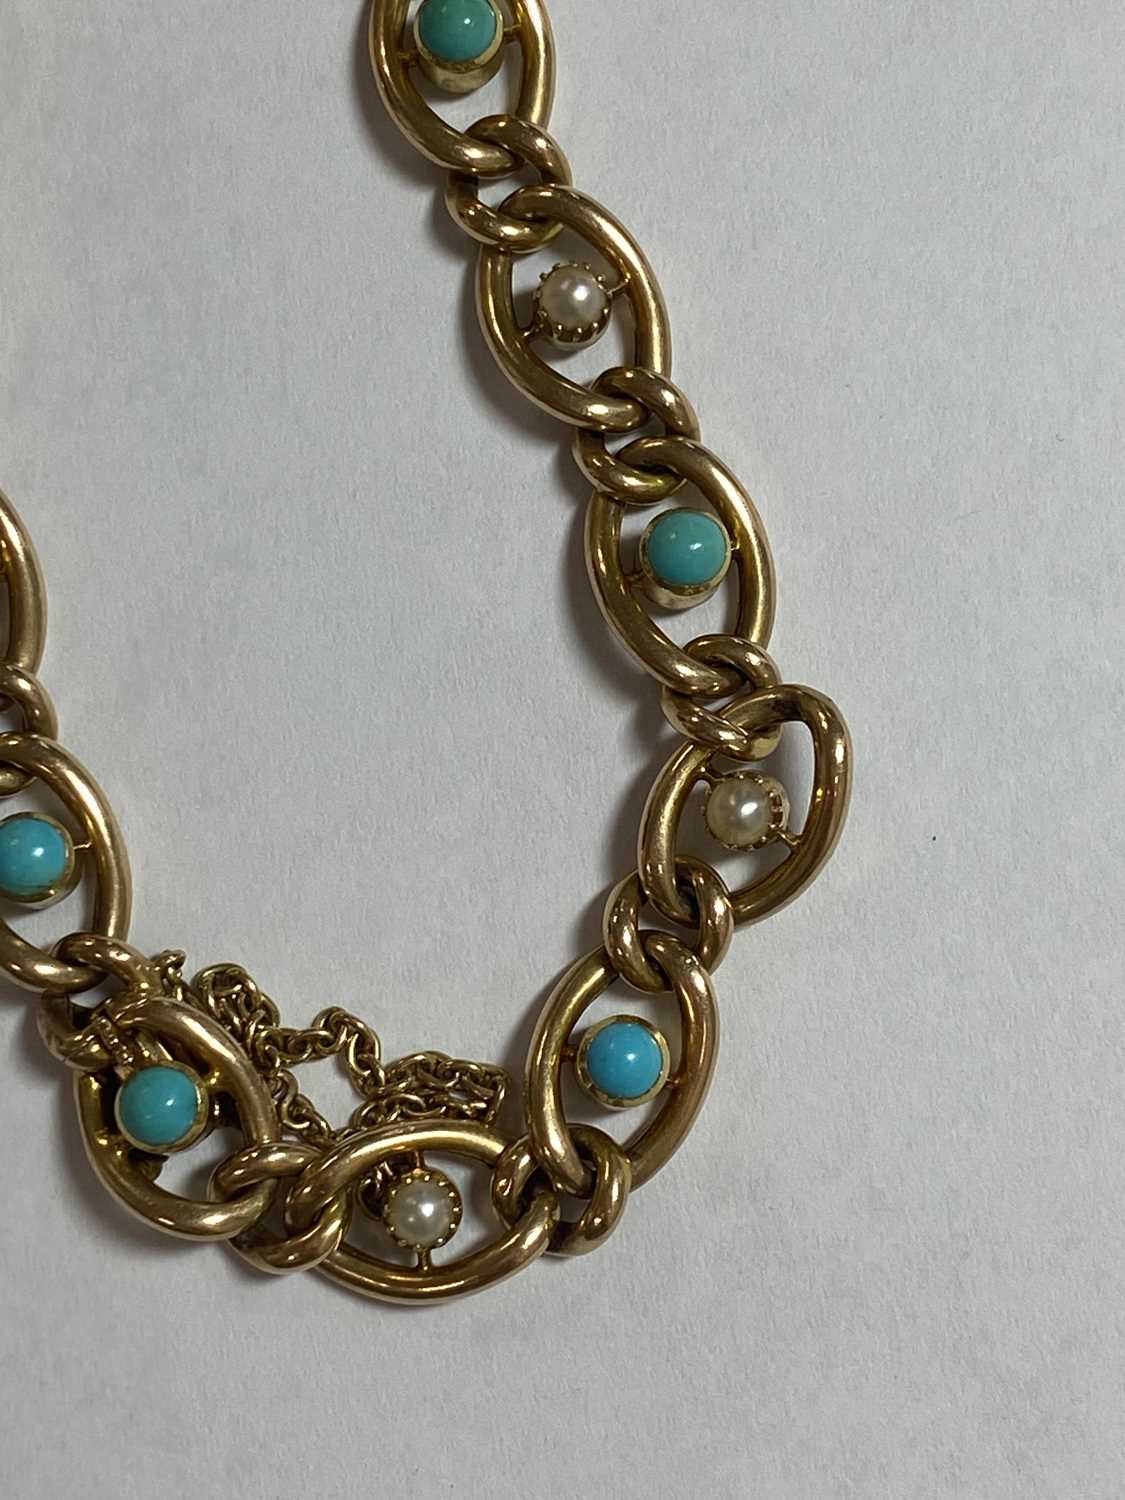 An early 20th century turquoise and seed pearl bracelet and a bar brooch - Image 3 of 12